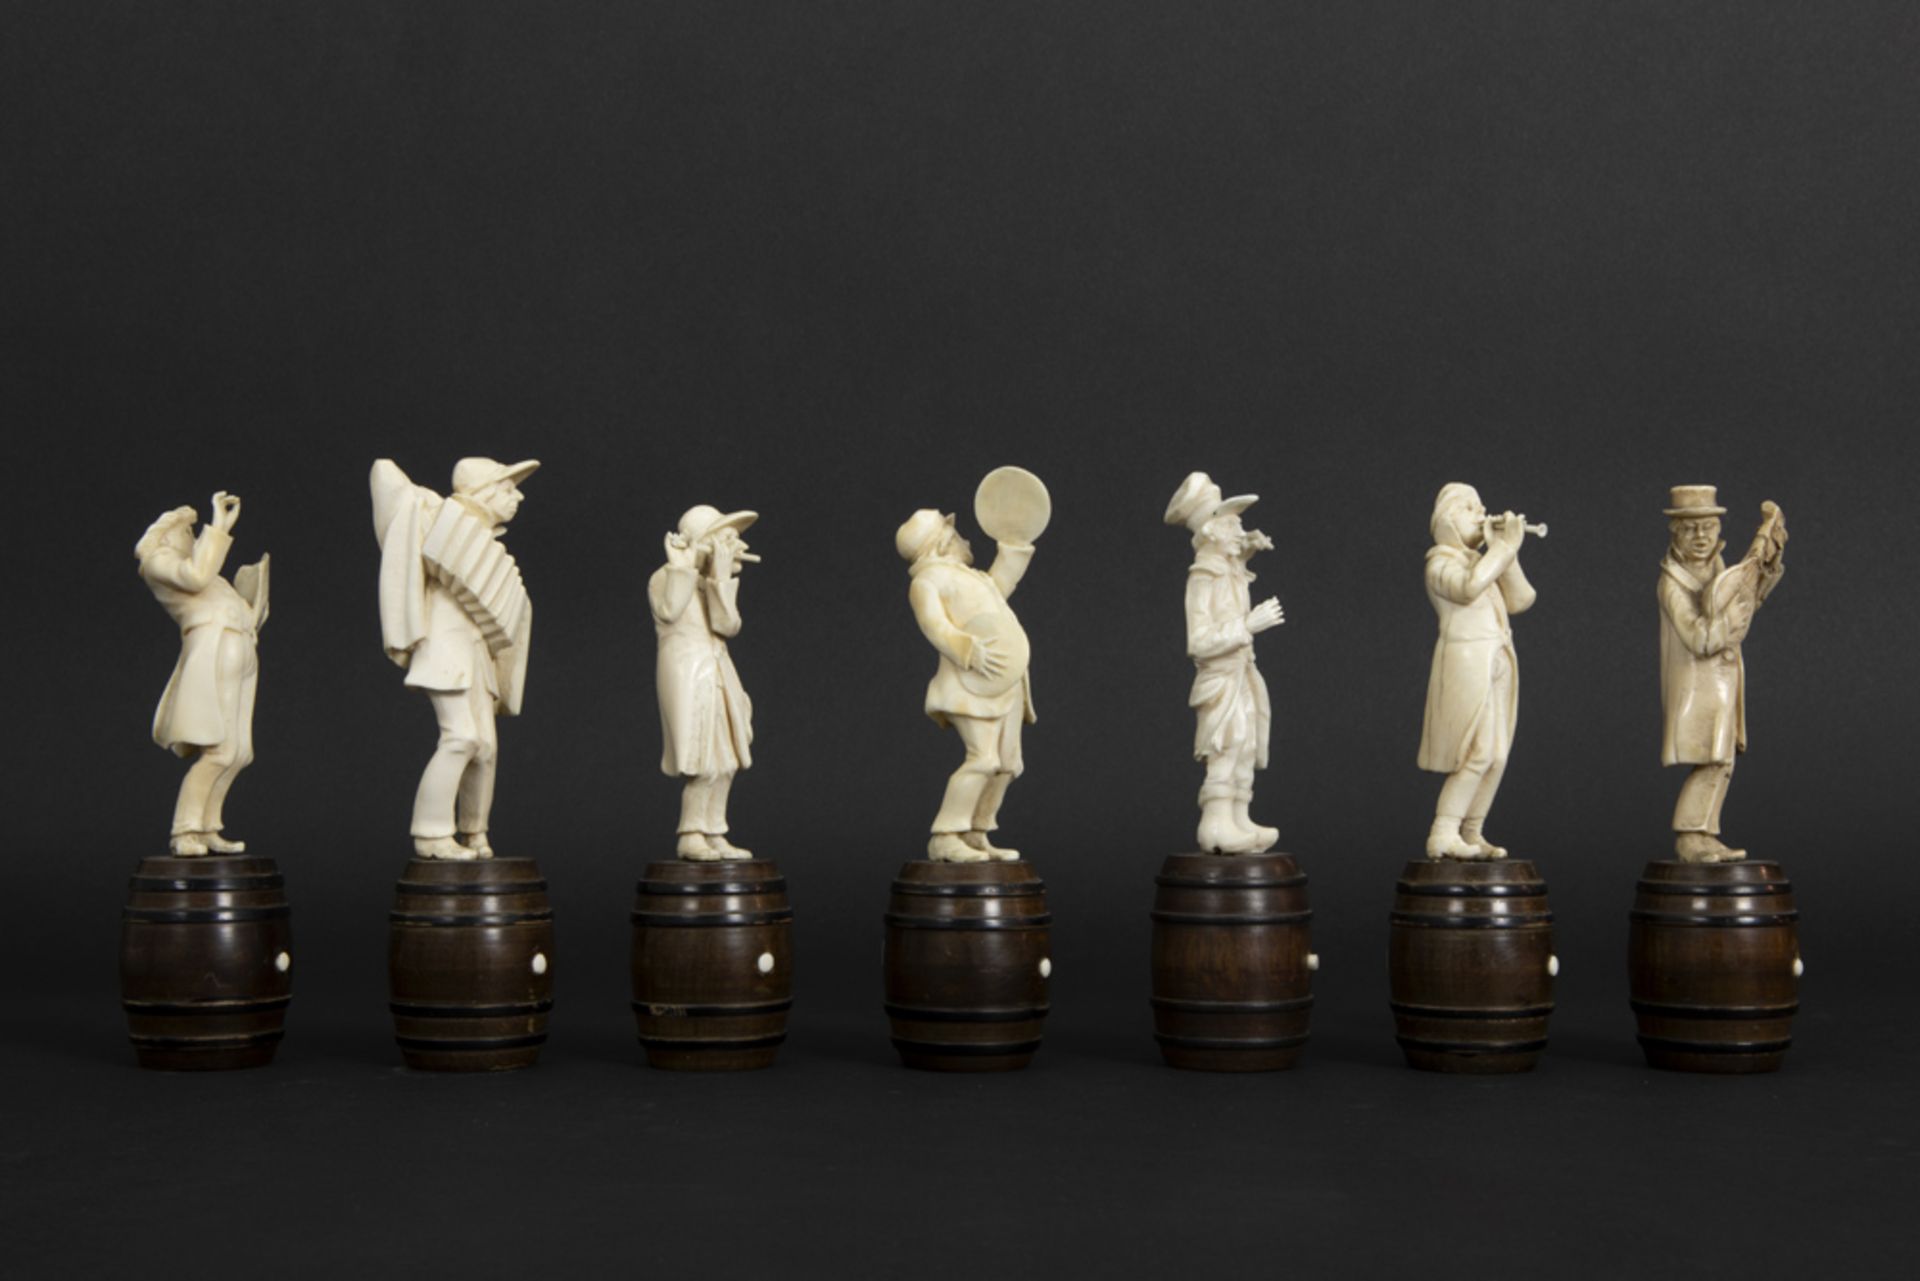 set of seven small antique figures in ivory, each standing on a wooden barrel - depicting a band - Image 4 of 6